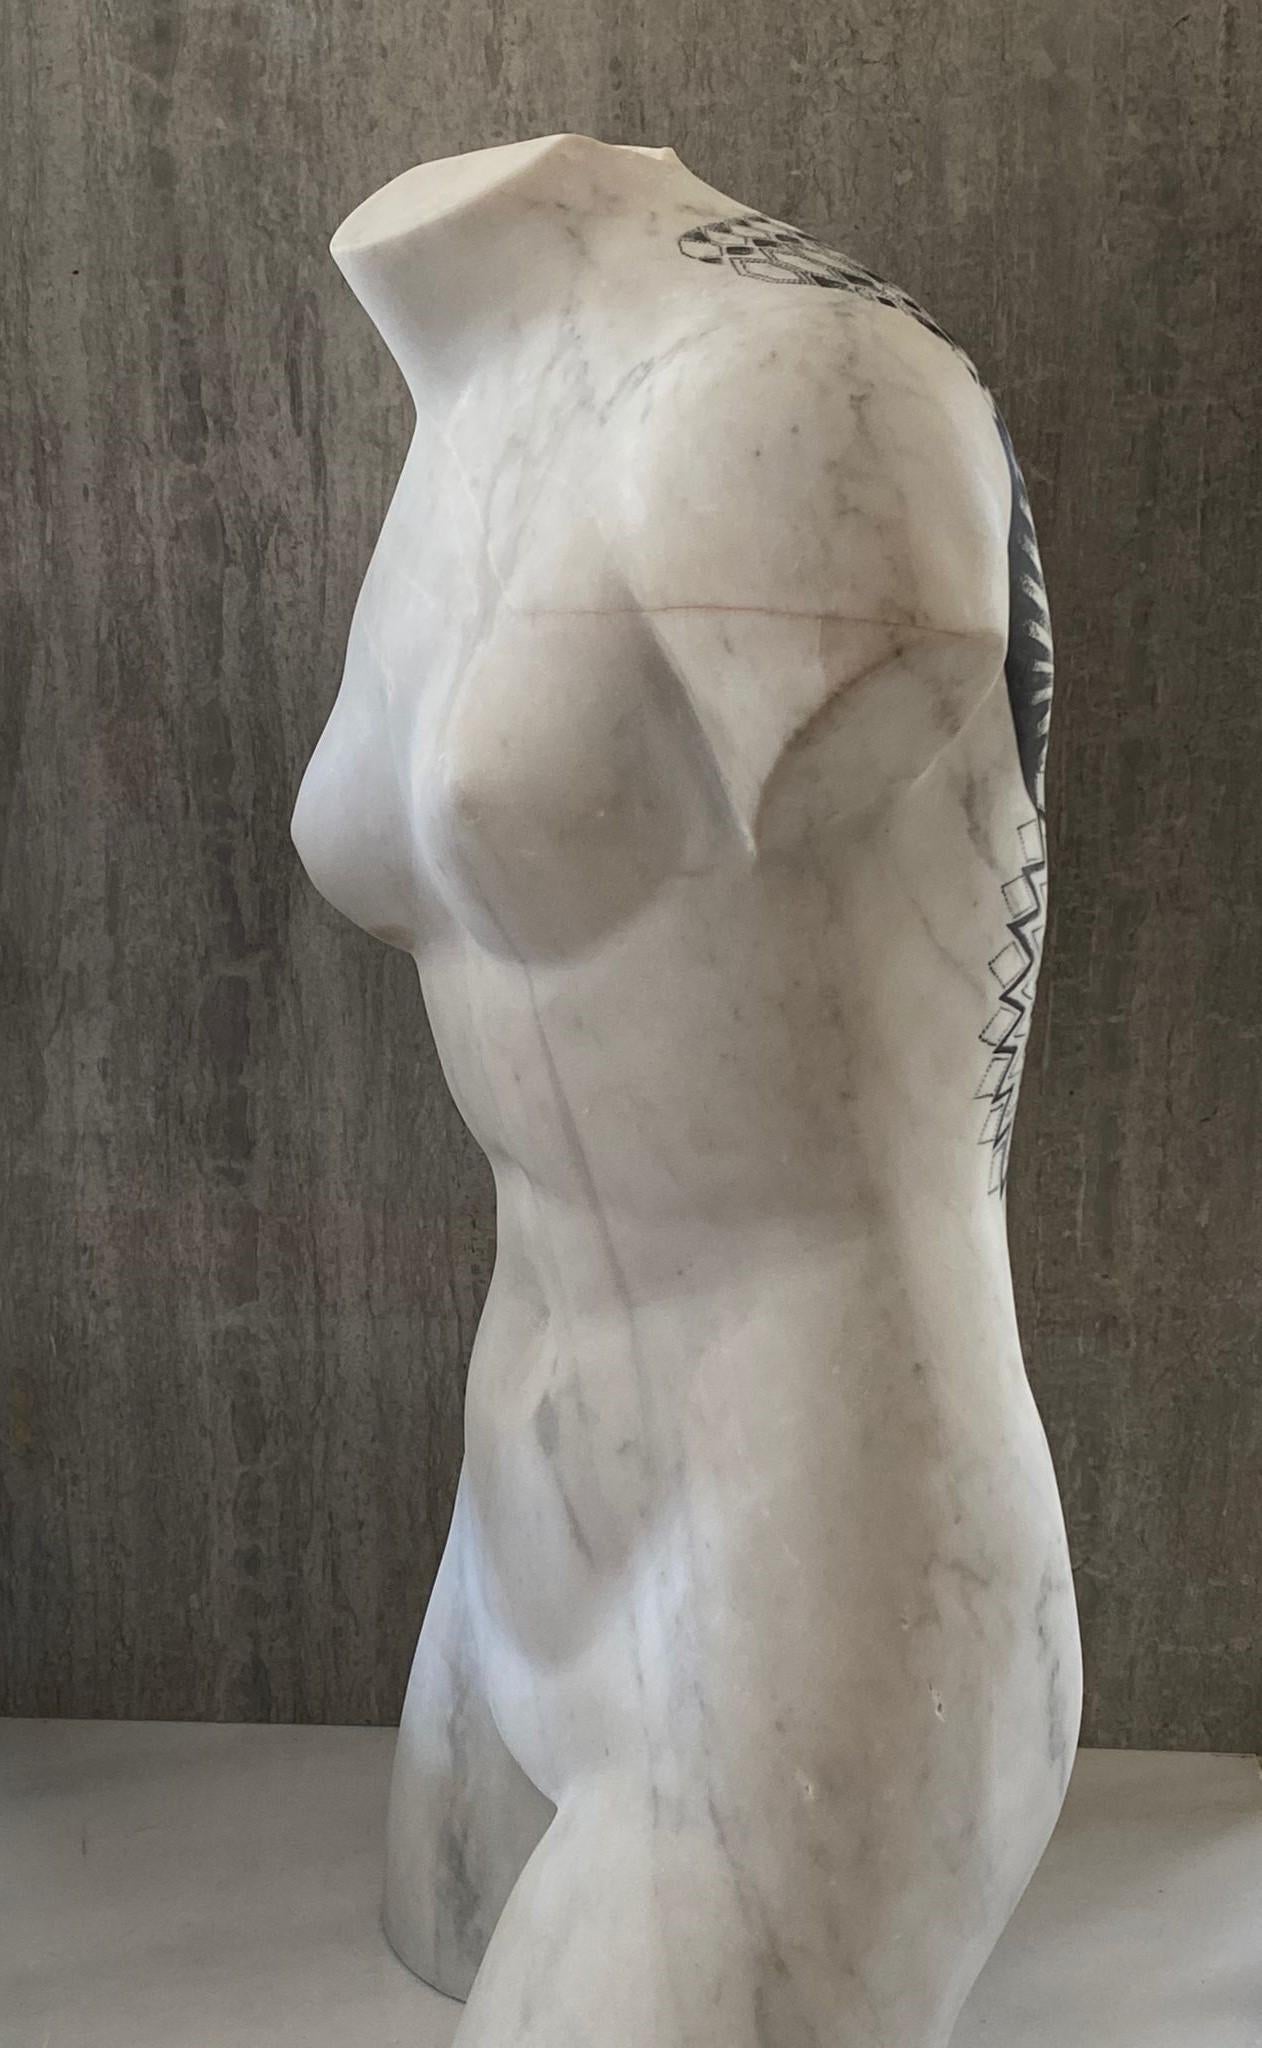 The sculpture bust was made from a single block of Statuario Carrara marble.
Tattoo was made with manual micro-dots technique by the artist.
  